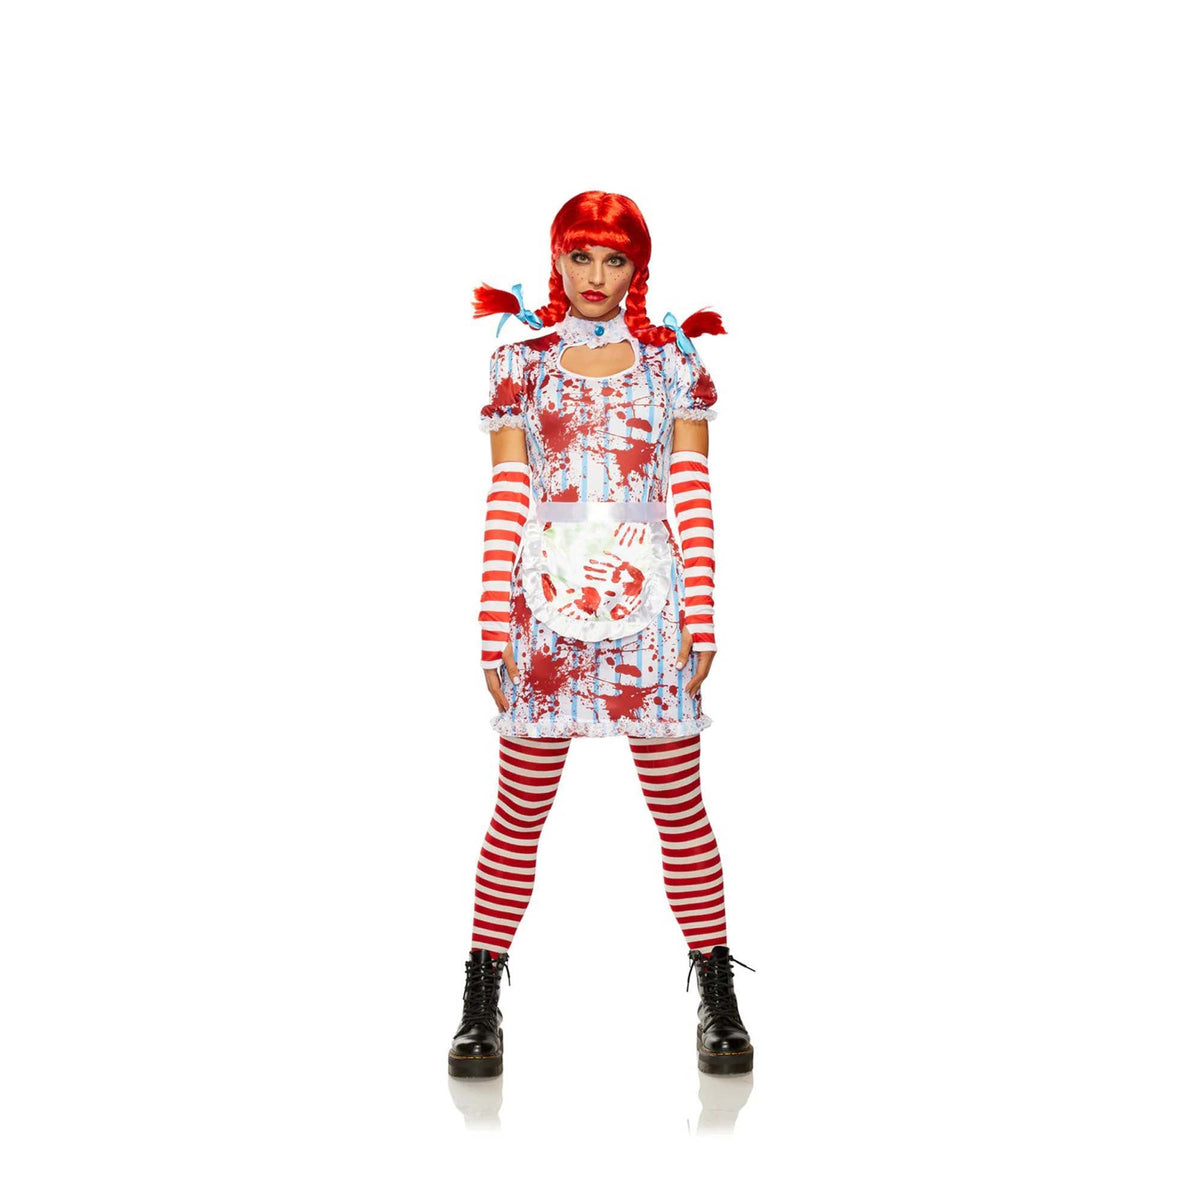 Seeing Red Inc. Costumes Evil Fast Food Girl Costume for Adults, Bloodstained Dress